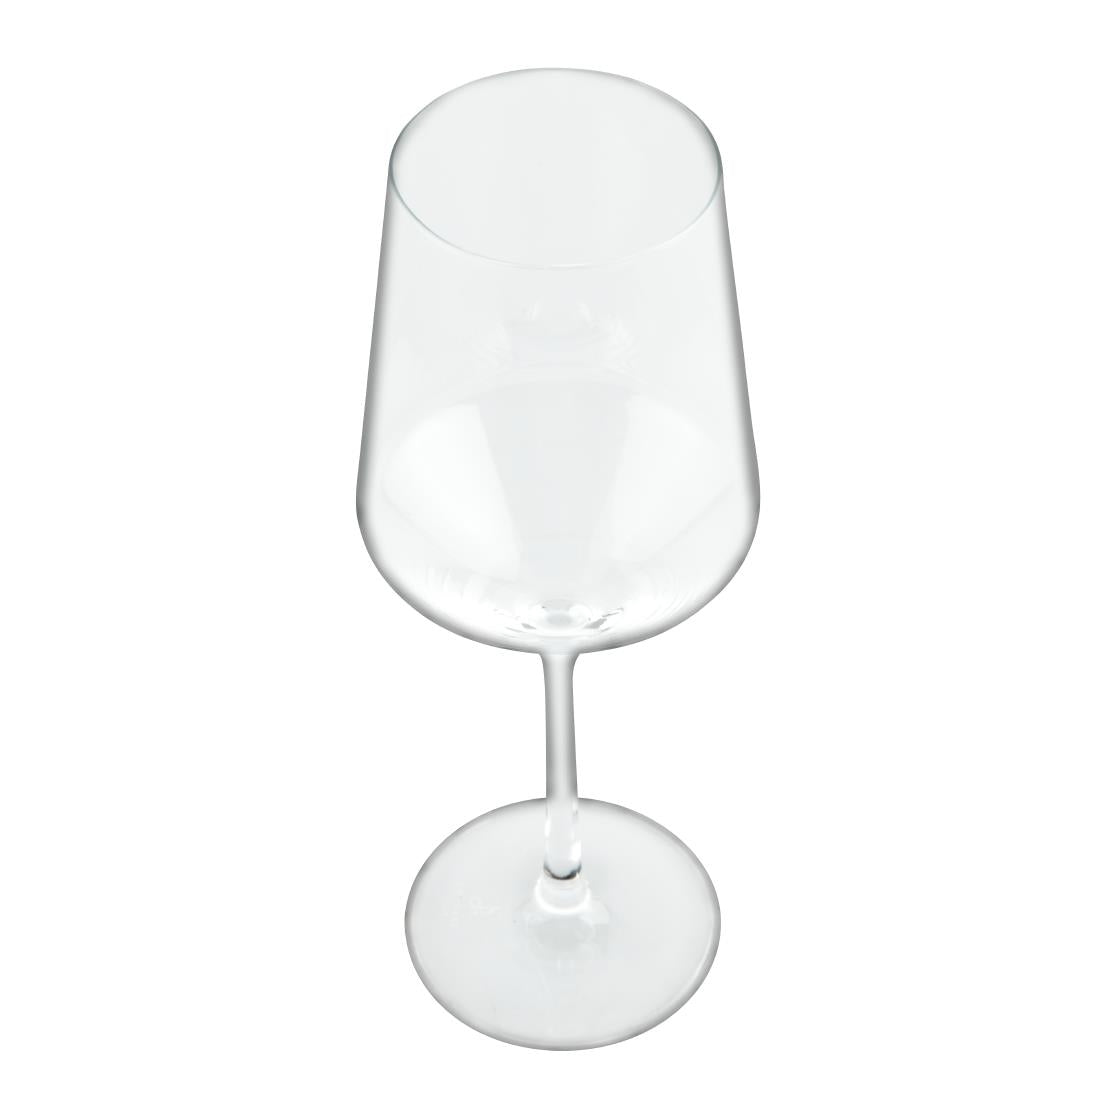 GD900 Schott Zwiesel Pure Crystal Red Wine Glasses 540ml (Pack of 6) JD Catering Equipment Solutions Ltd